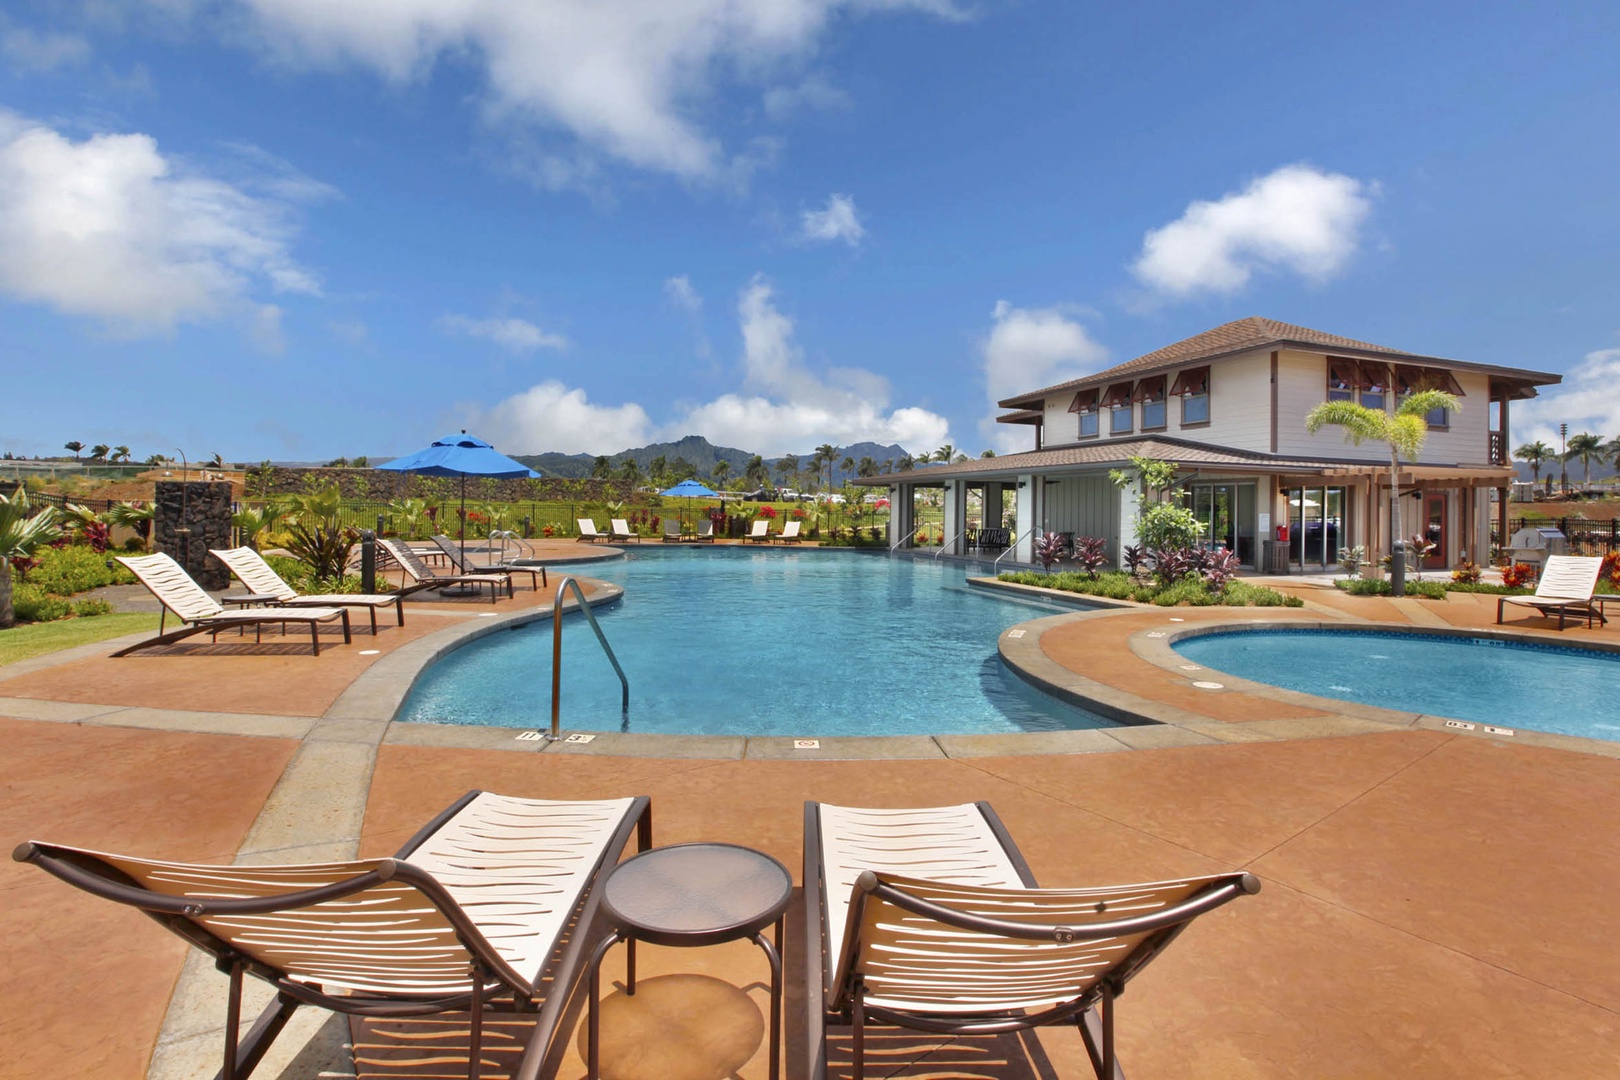 Koloa Vacation Rentals, Pili Mai 11K - Relax and take a refreshing dip in the community pool or lounge poolside